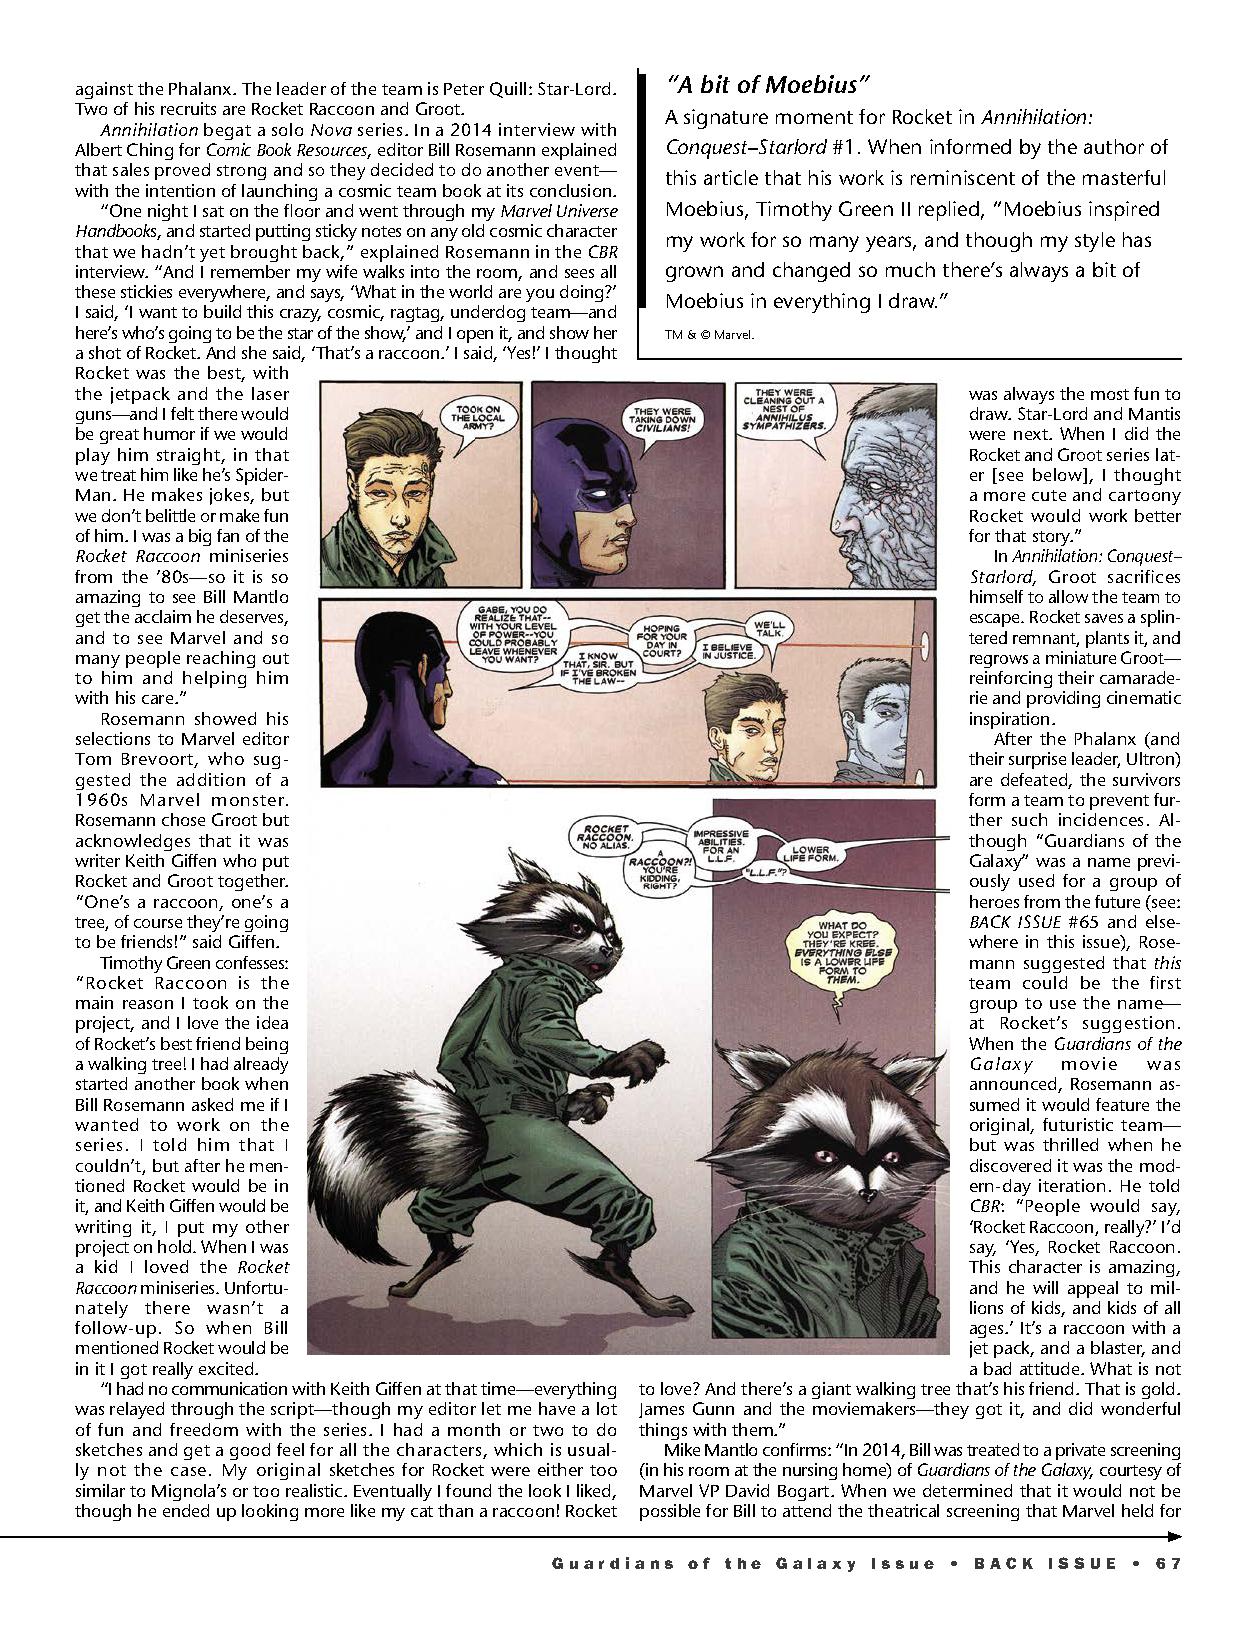 Read online Back Issue comic -  Issue #119 - 69